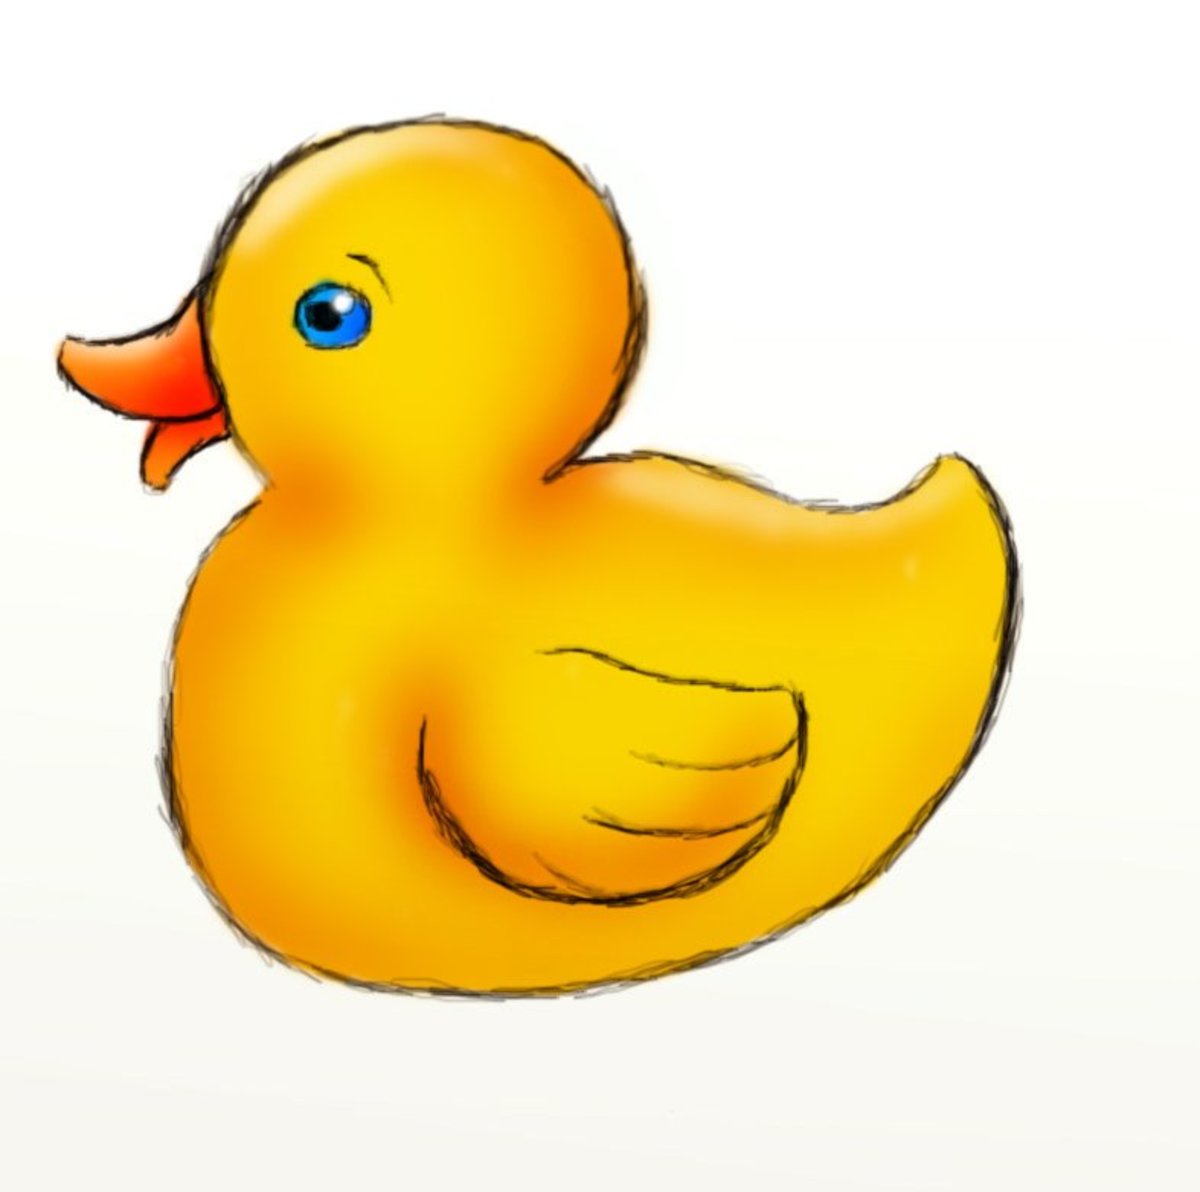 How to Draw a Rubber Duck